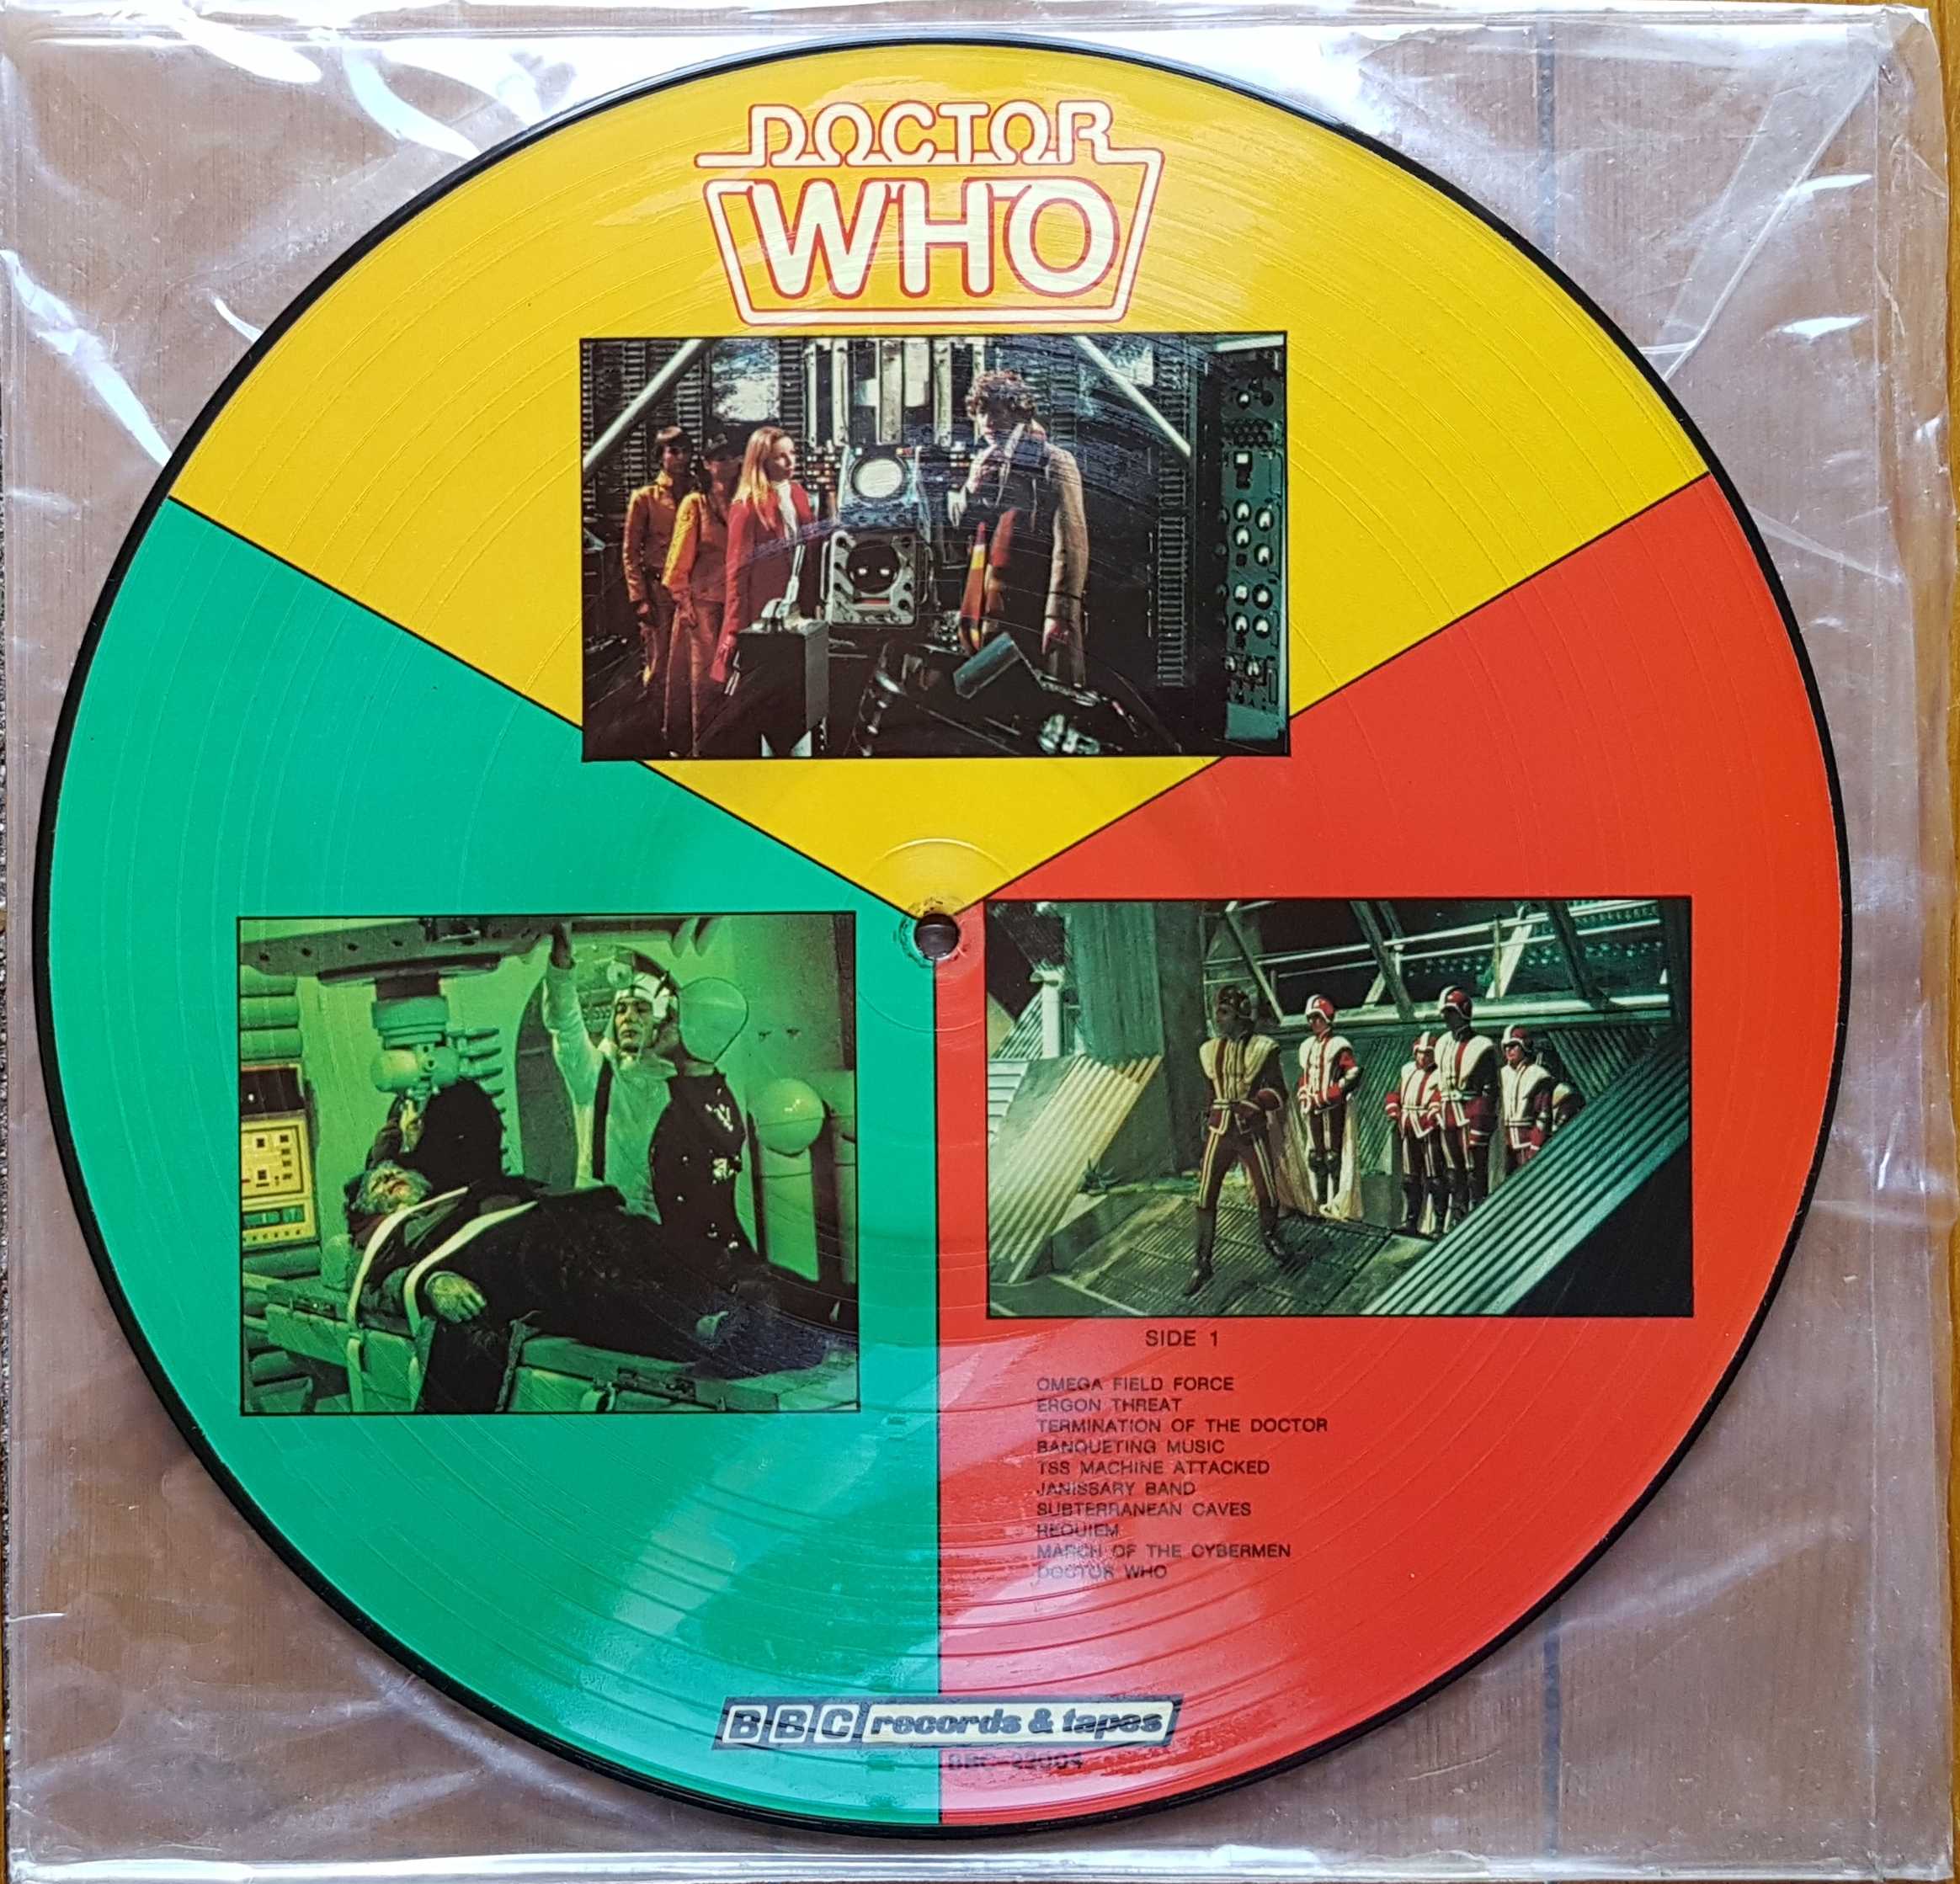 Picture of BBC - 22004 Doctor Who the music - Picture disc (US import - re-issue) by artist Various from the BBC albums - Records and Tapes library